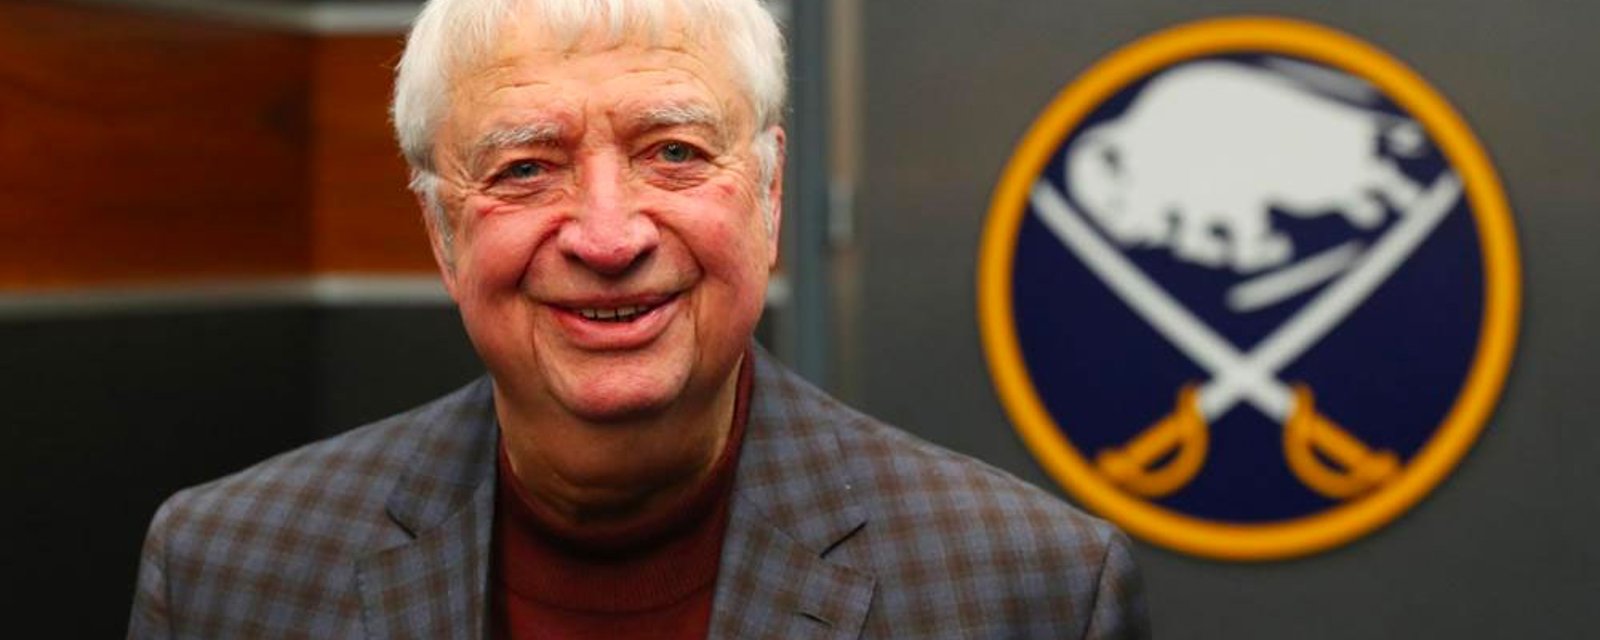 In a rough season for attendance Sabres officially sell out Rick Jeanneret's retirement night